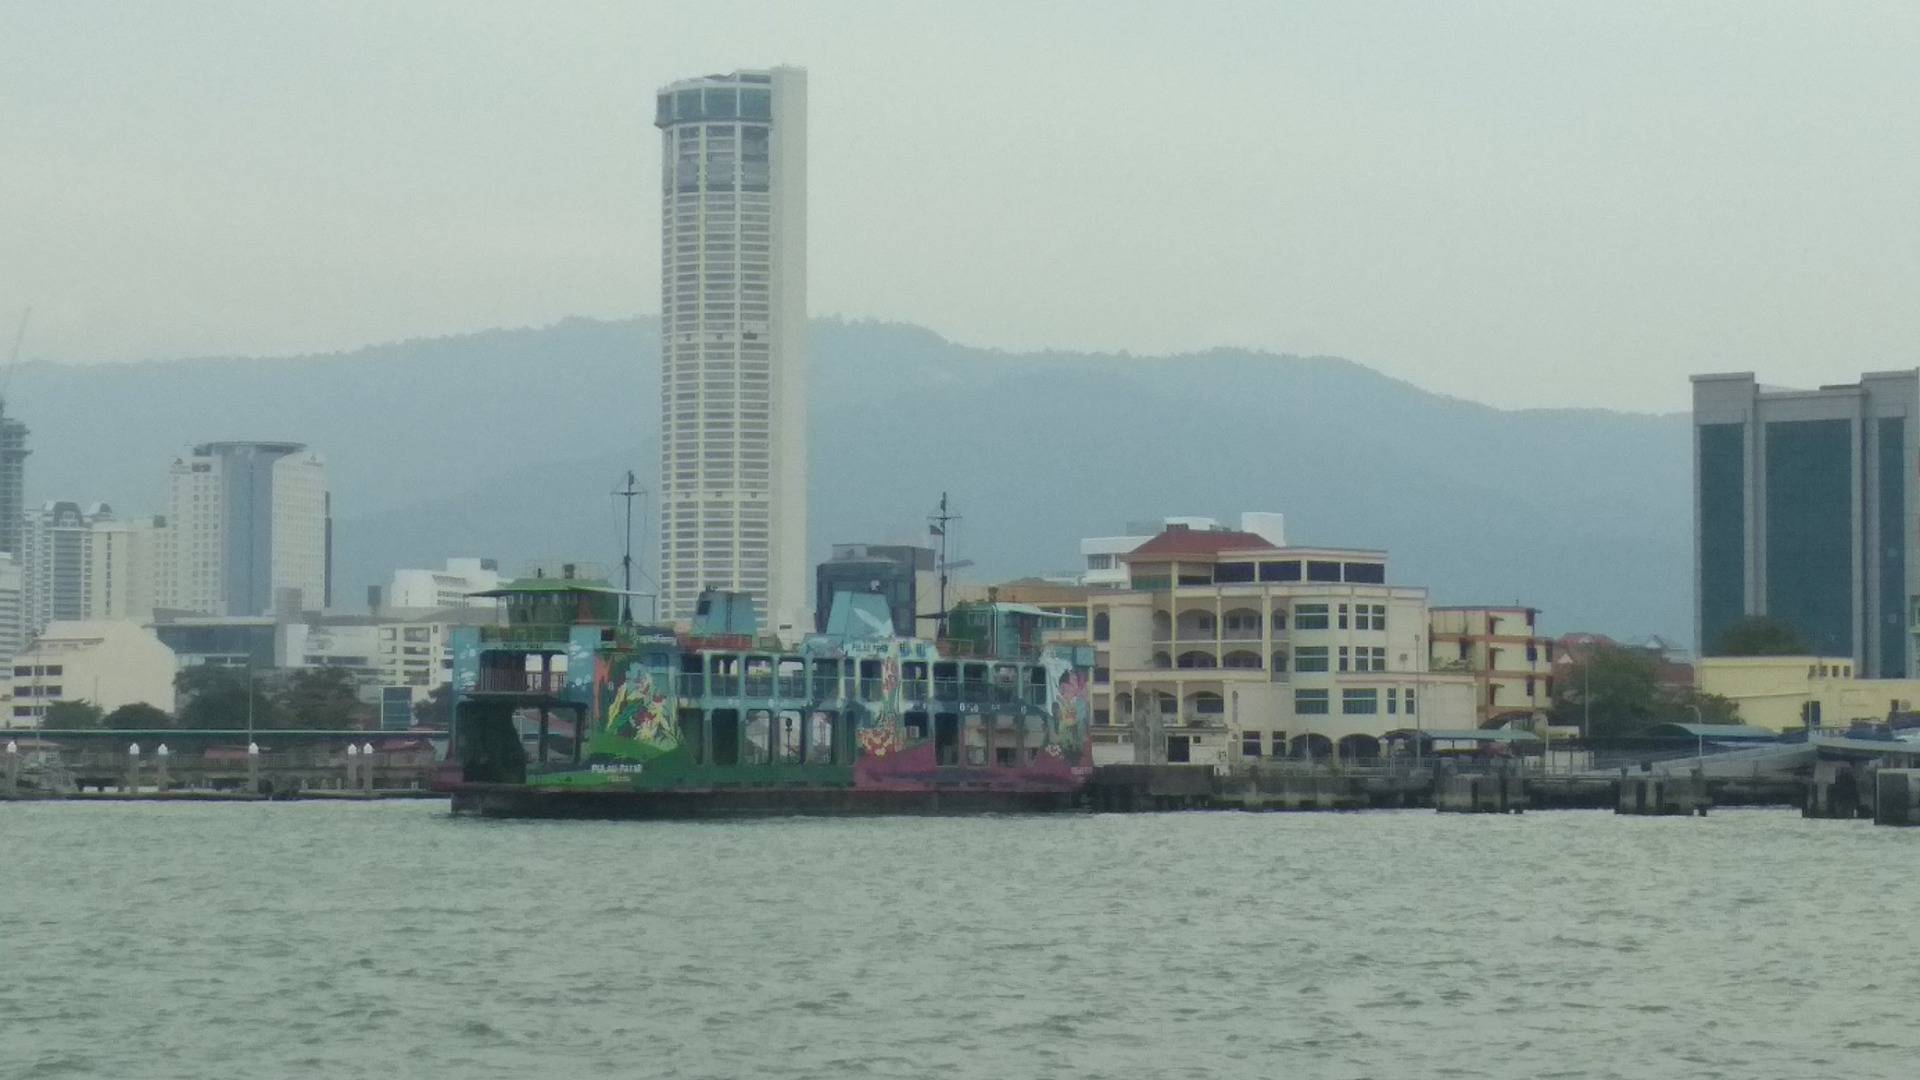 Significance of colorful old ferry and tallest building in the island - Komtar